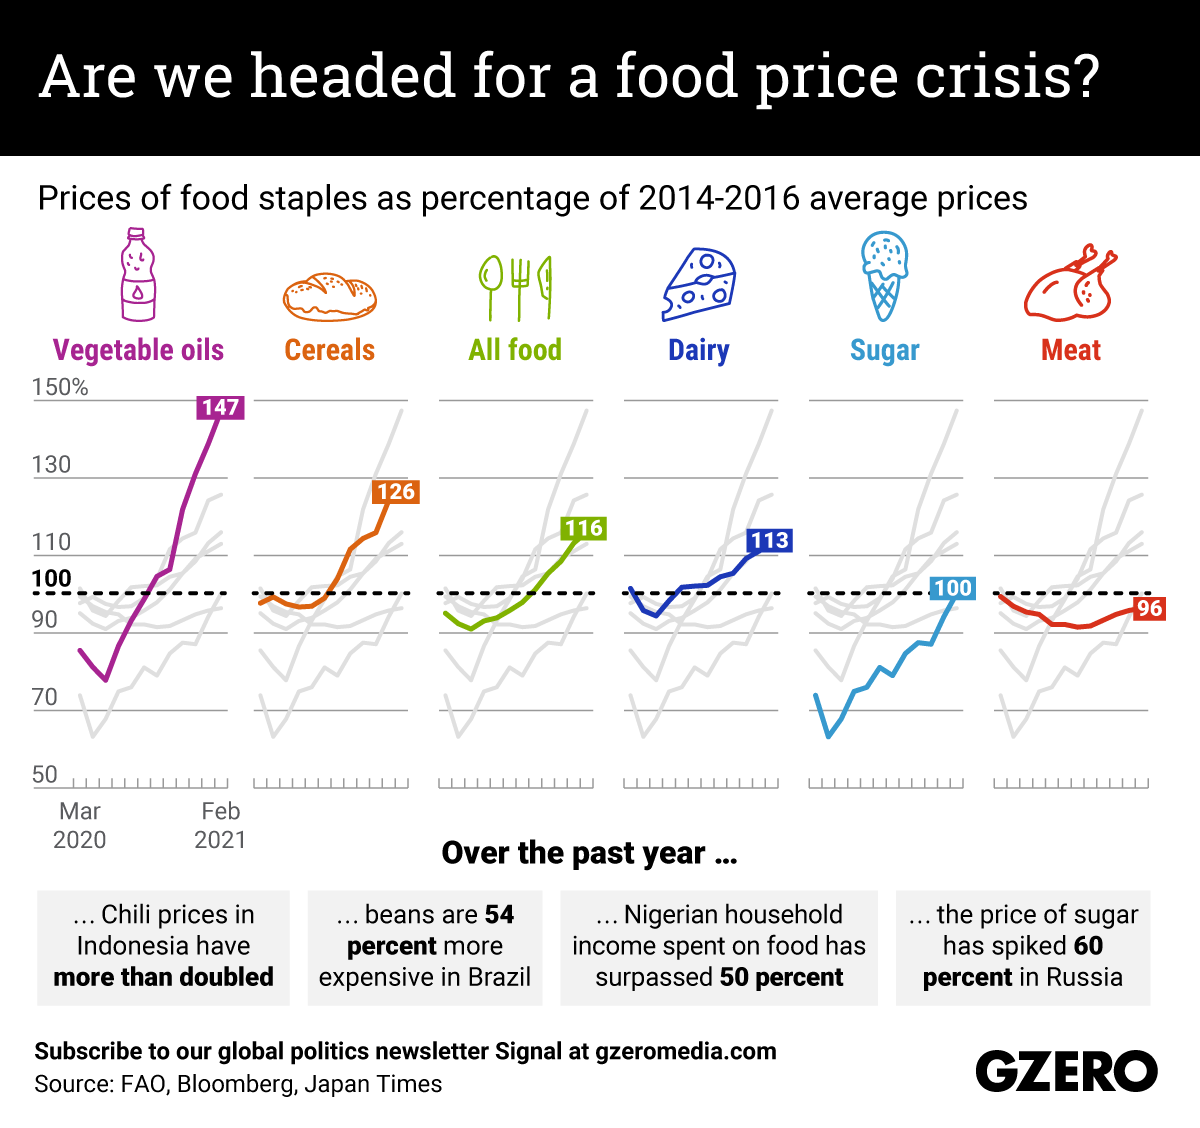 The Graphic Truth Are we headed for a food price crisis? GZERO Media